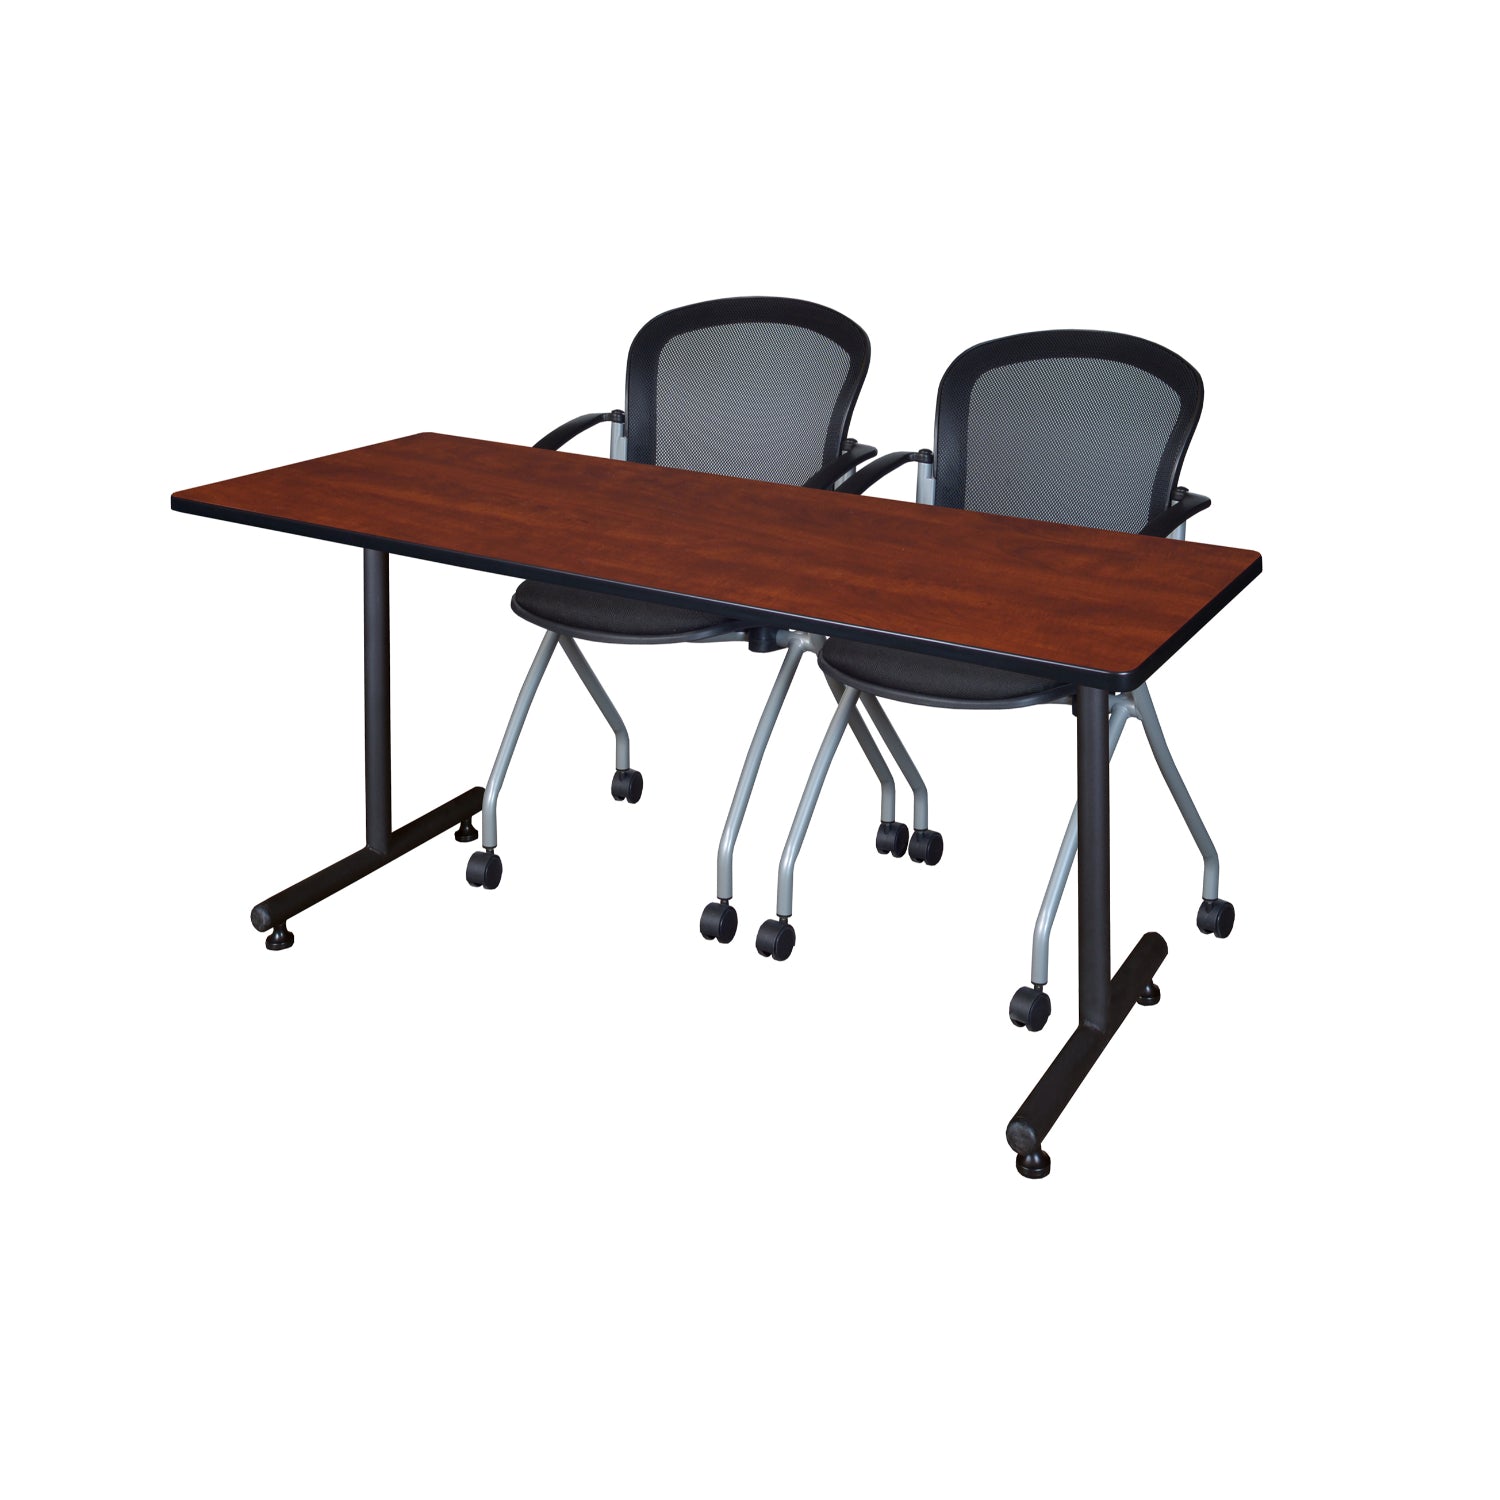 Kobe Training Table and Chair Package, Kobe 60" x 24" T-Base Training/Seminar Table with 2 Cadence Nesting Chairs